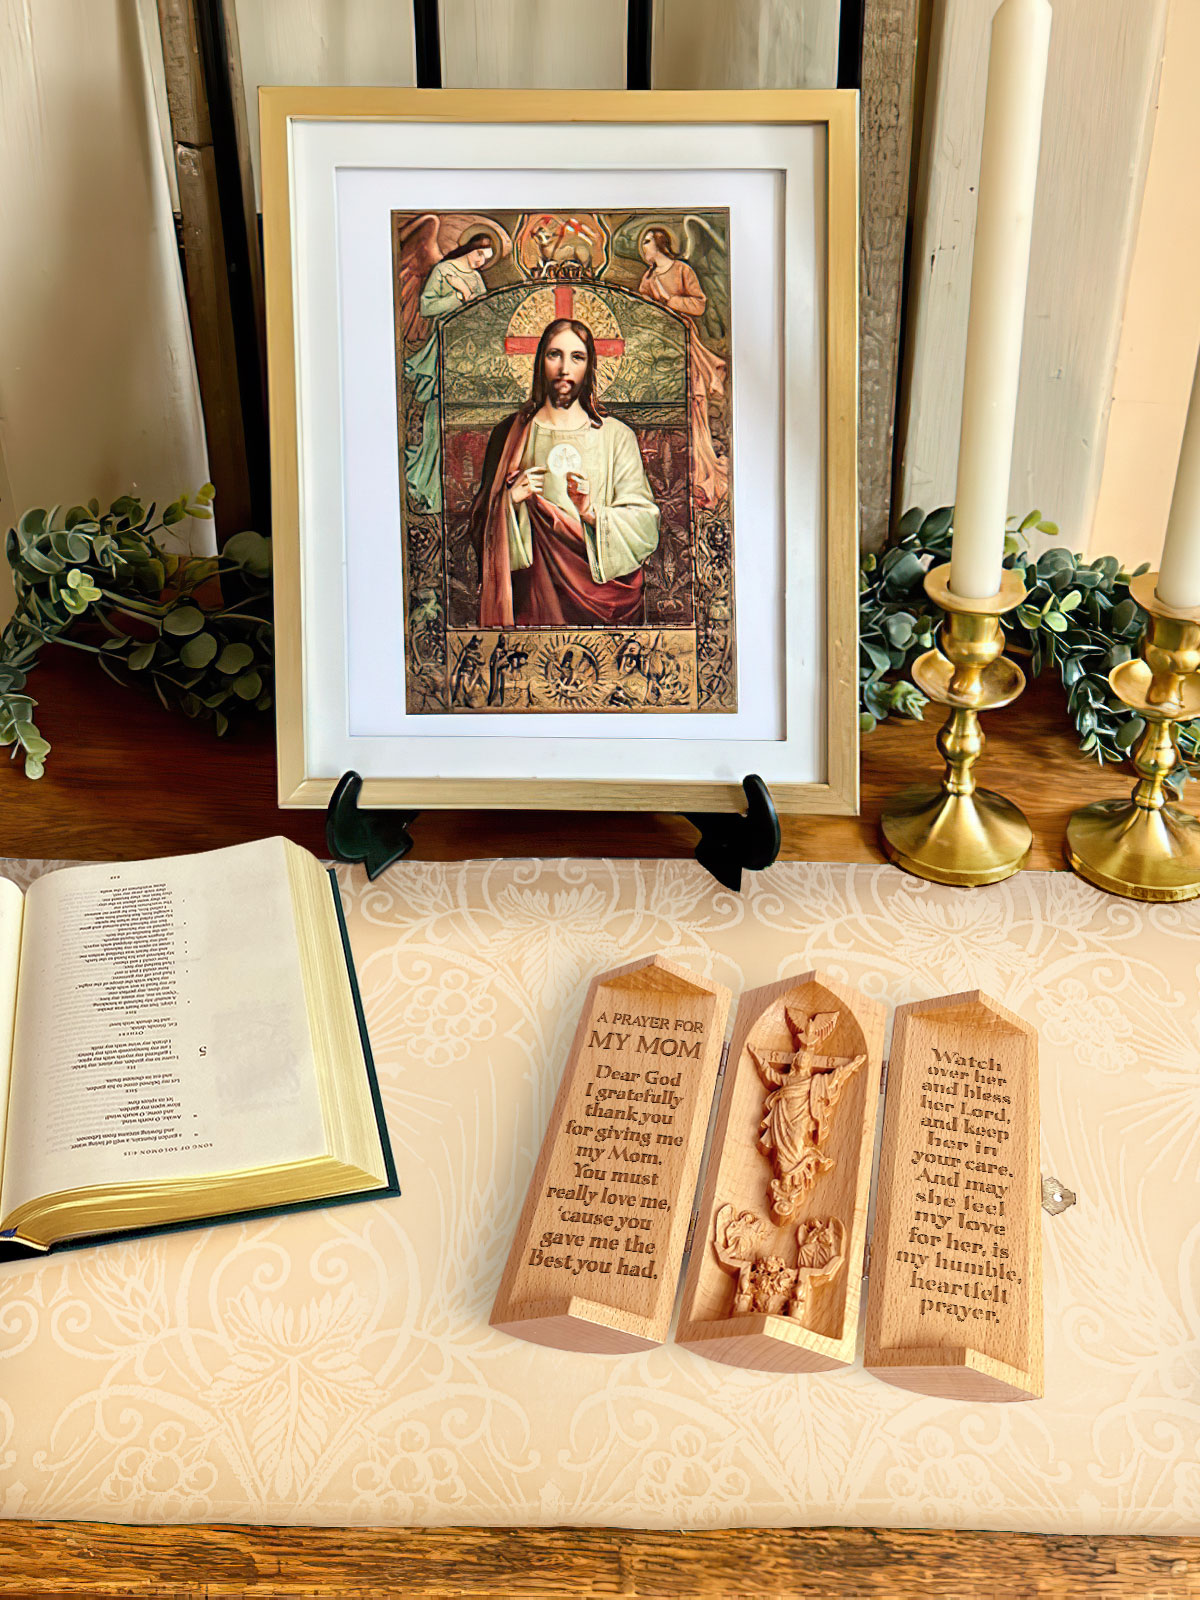 A Prayer For My Family - Openable Wooden Cylinder Sculpture of Jesus Christ